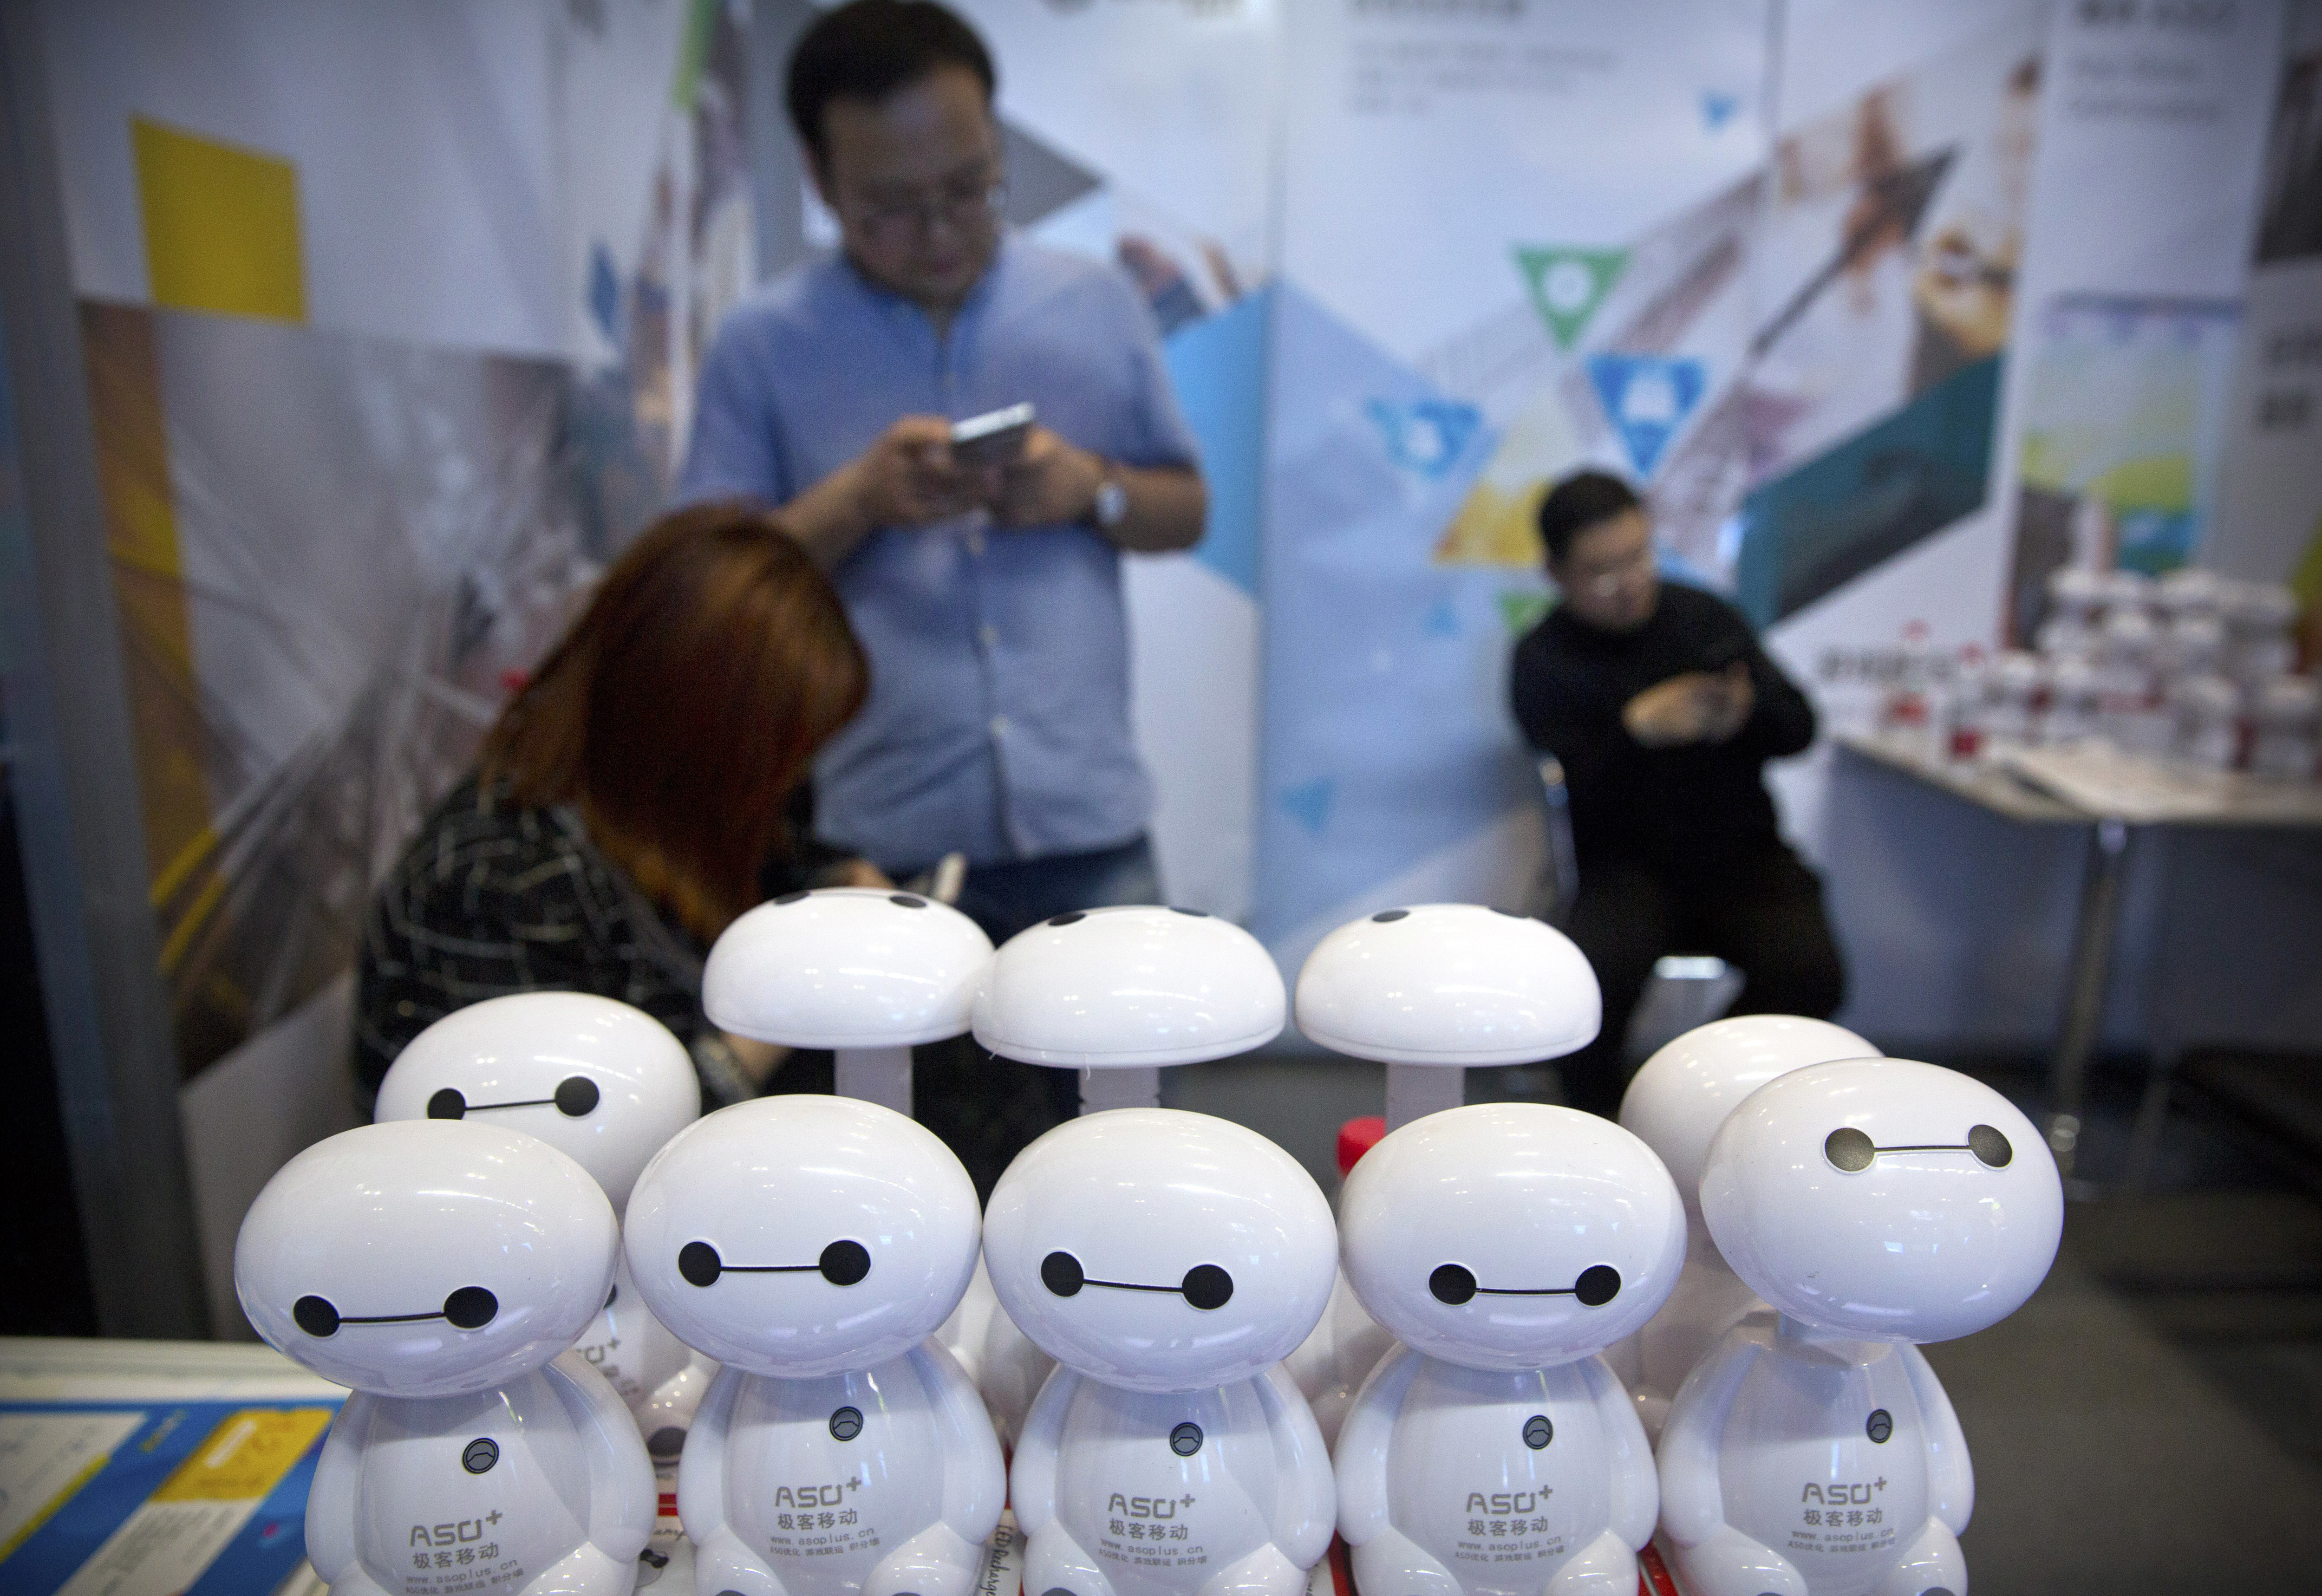 Staff members use their smartphones near a stack of plastic toy robots at a booth at the Global Mobile Internet Conference (GMIC) in Beijing, Thursday, April 26, 2018. The GMIC features current and future trends in the mobile Internet industry by some major foreign and Chinese internet companies. (AP Photo/Mark Schiefelbein)